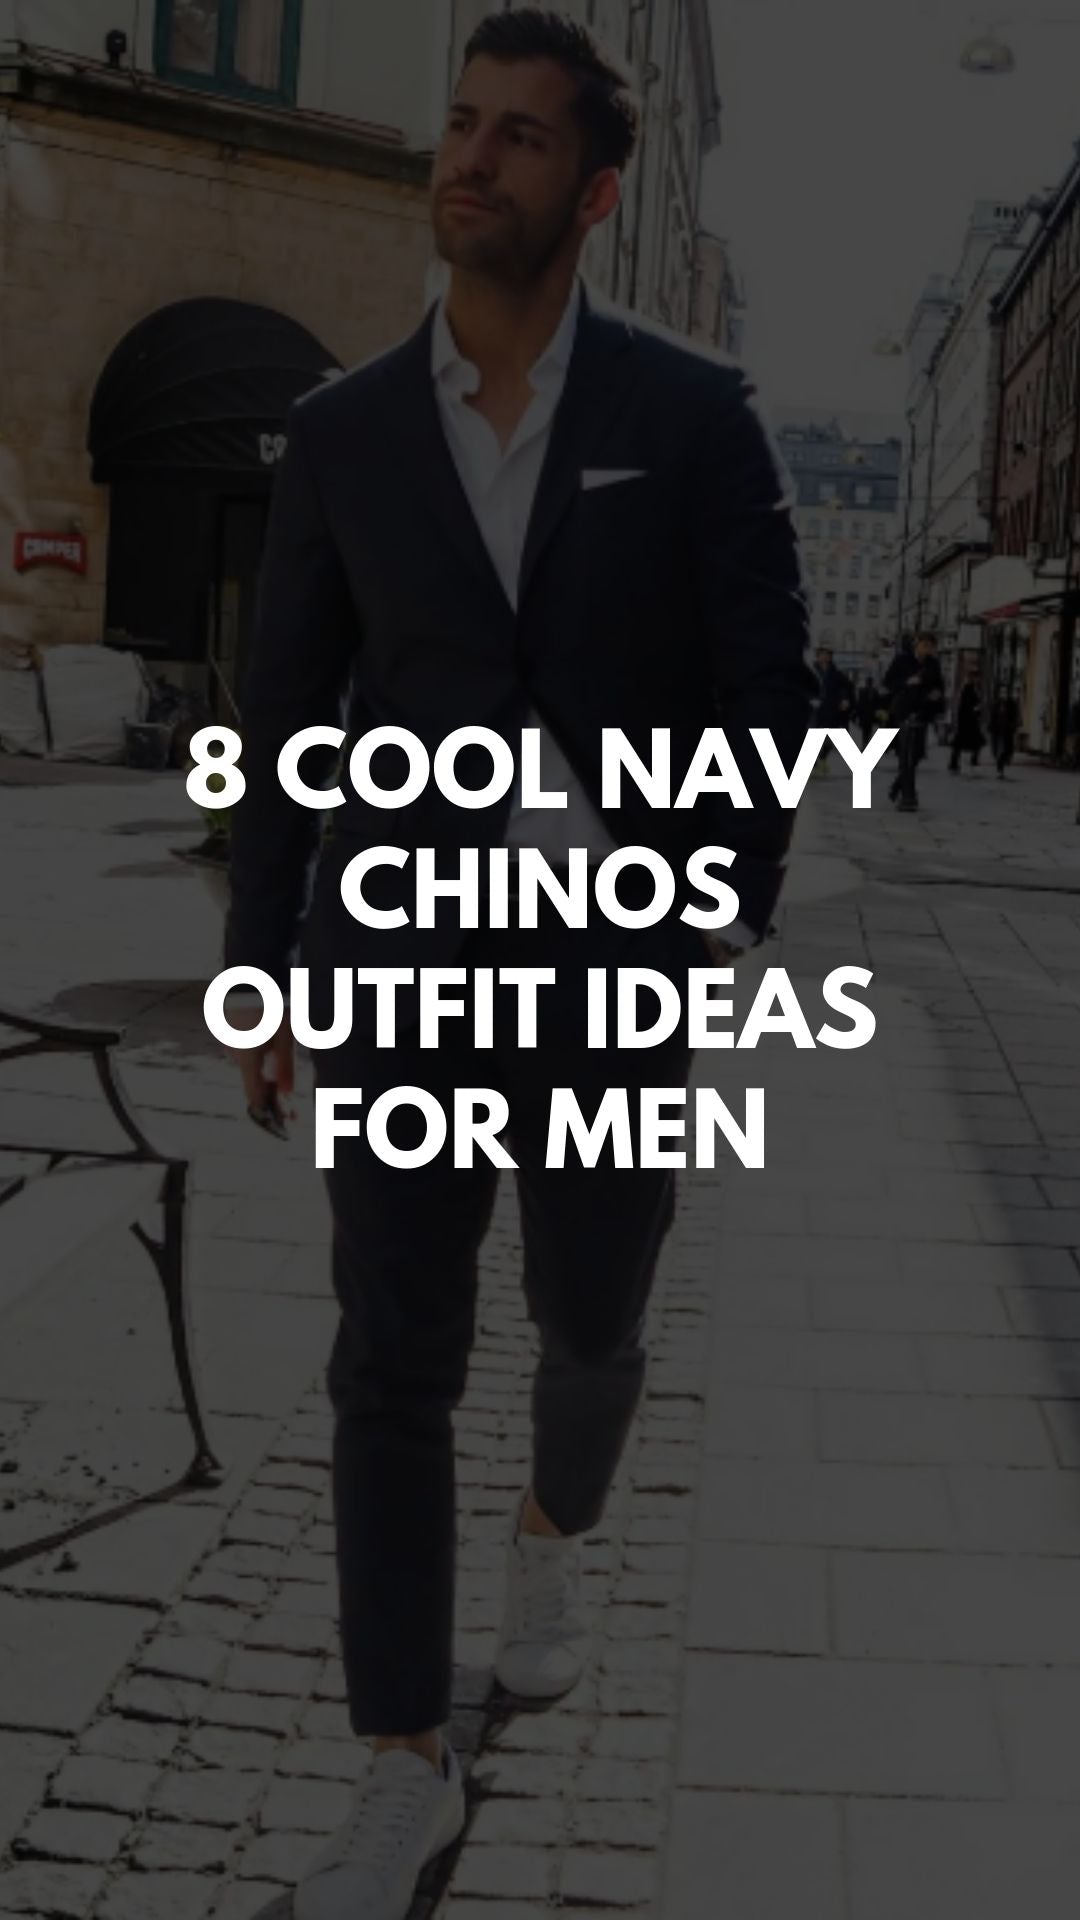 8 Cool Navy Chinos Outfit Ideas #navychinos #mensfashion